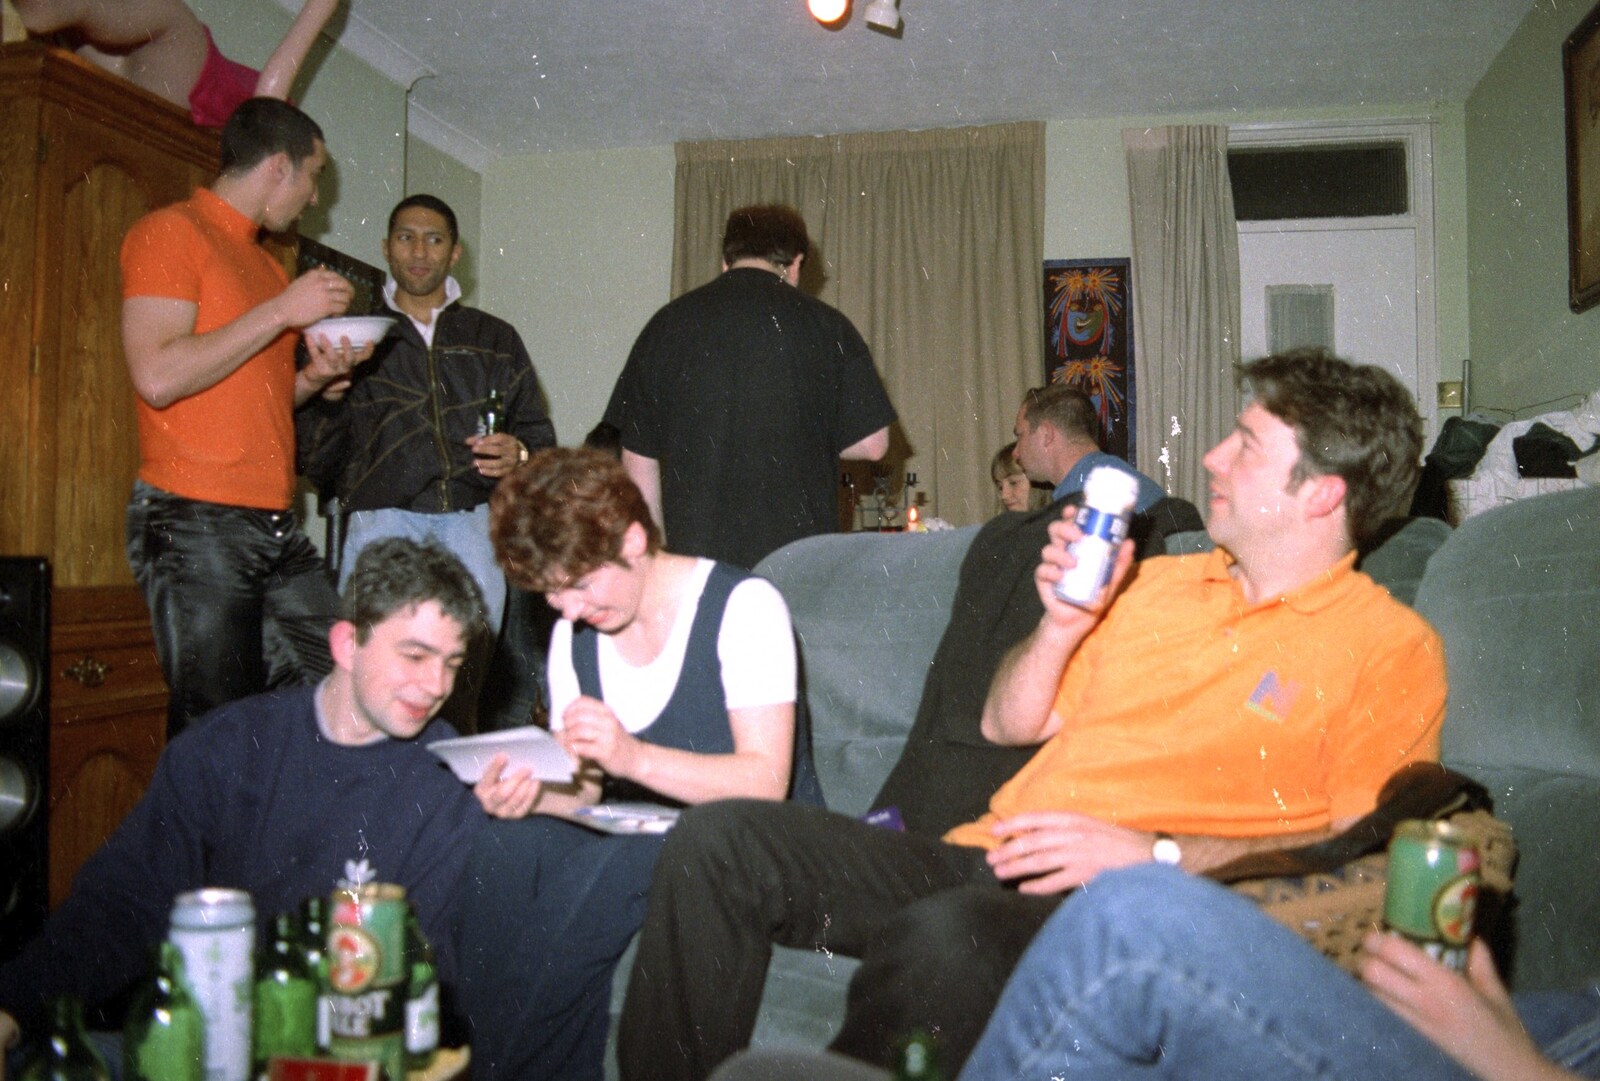 A CISU Party Round Trev's House, Cavendish Street, Ipswich - 17th May 1997: A room full of people